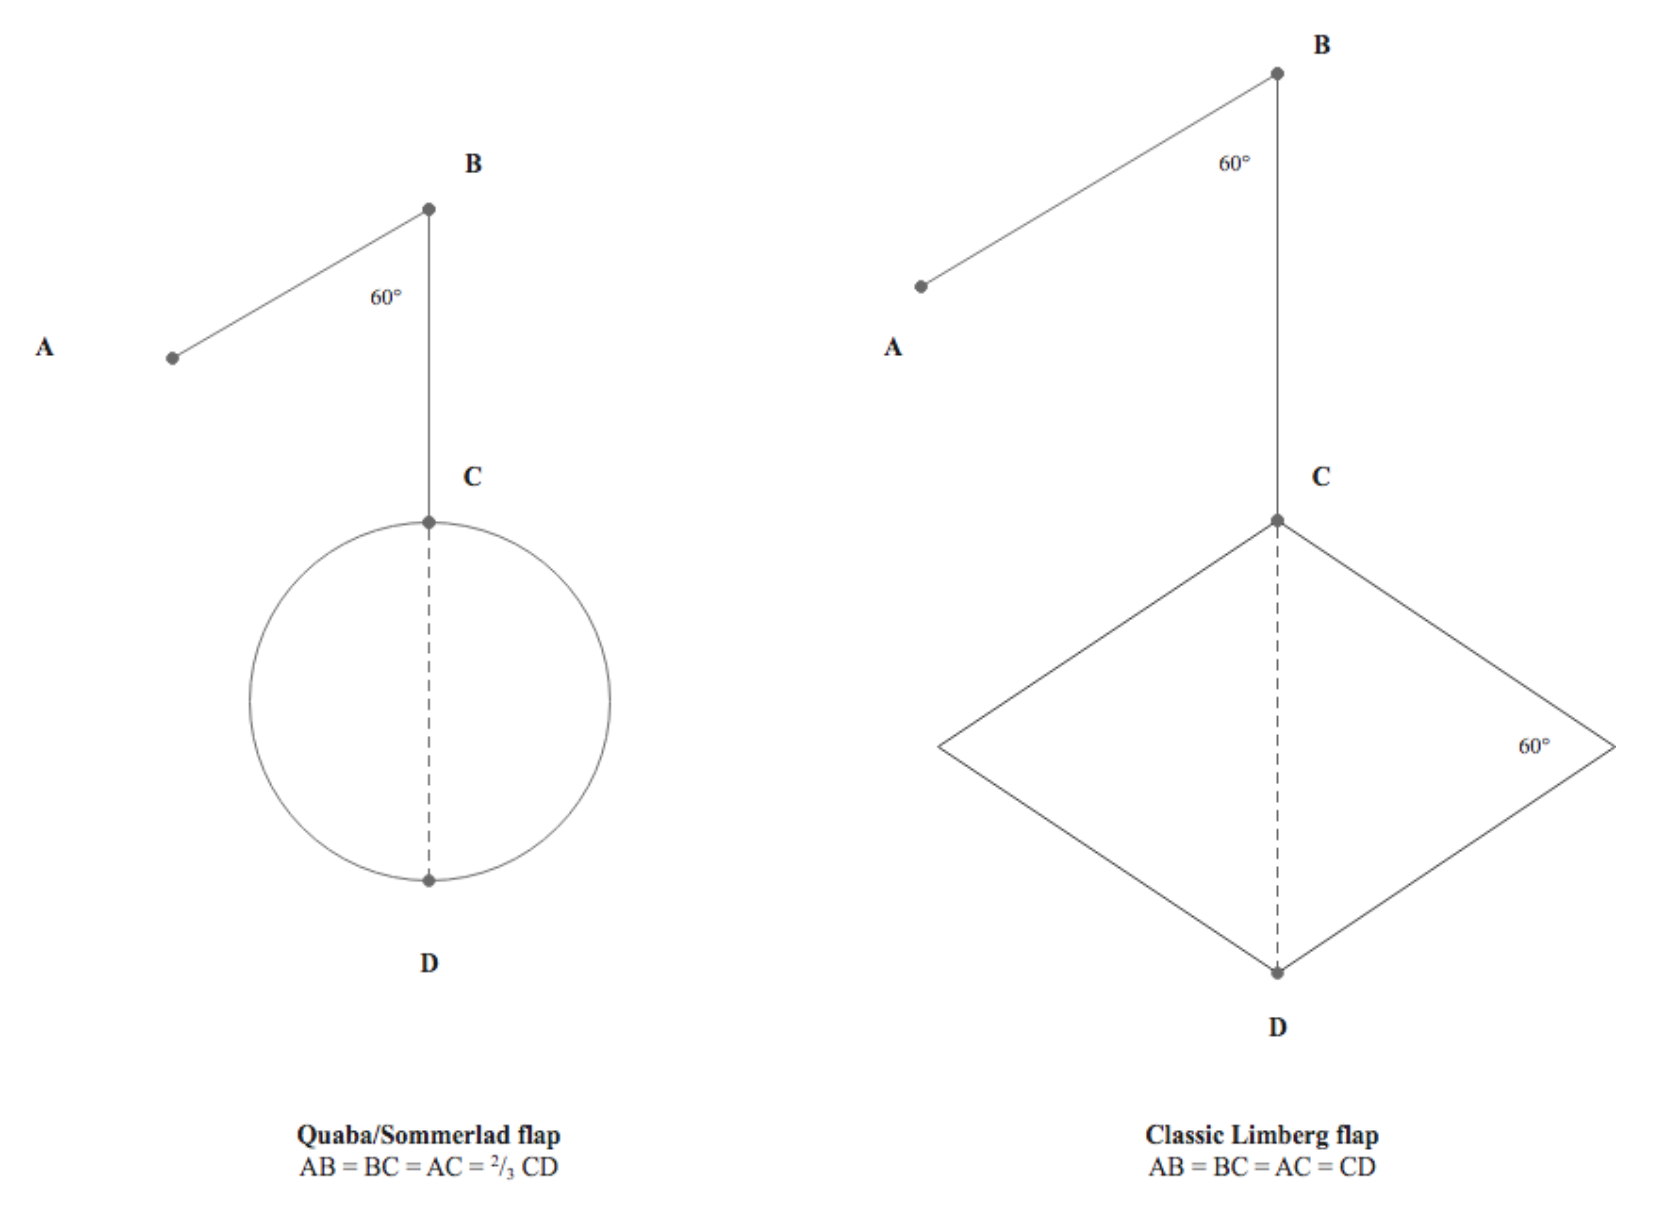 Figure 4: Comparison between Quaba/ Sommerlad flap modified design and classic Limberg design. For the modified design: the defect may be round in shape and reconstructed with a rhombic flap smaller than the defect.